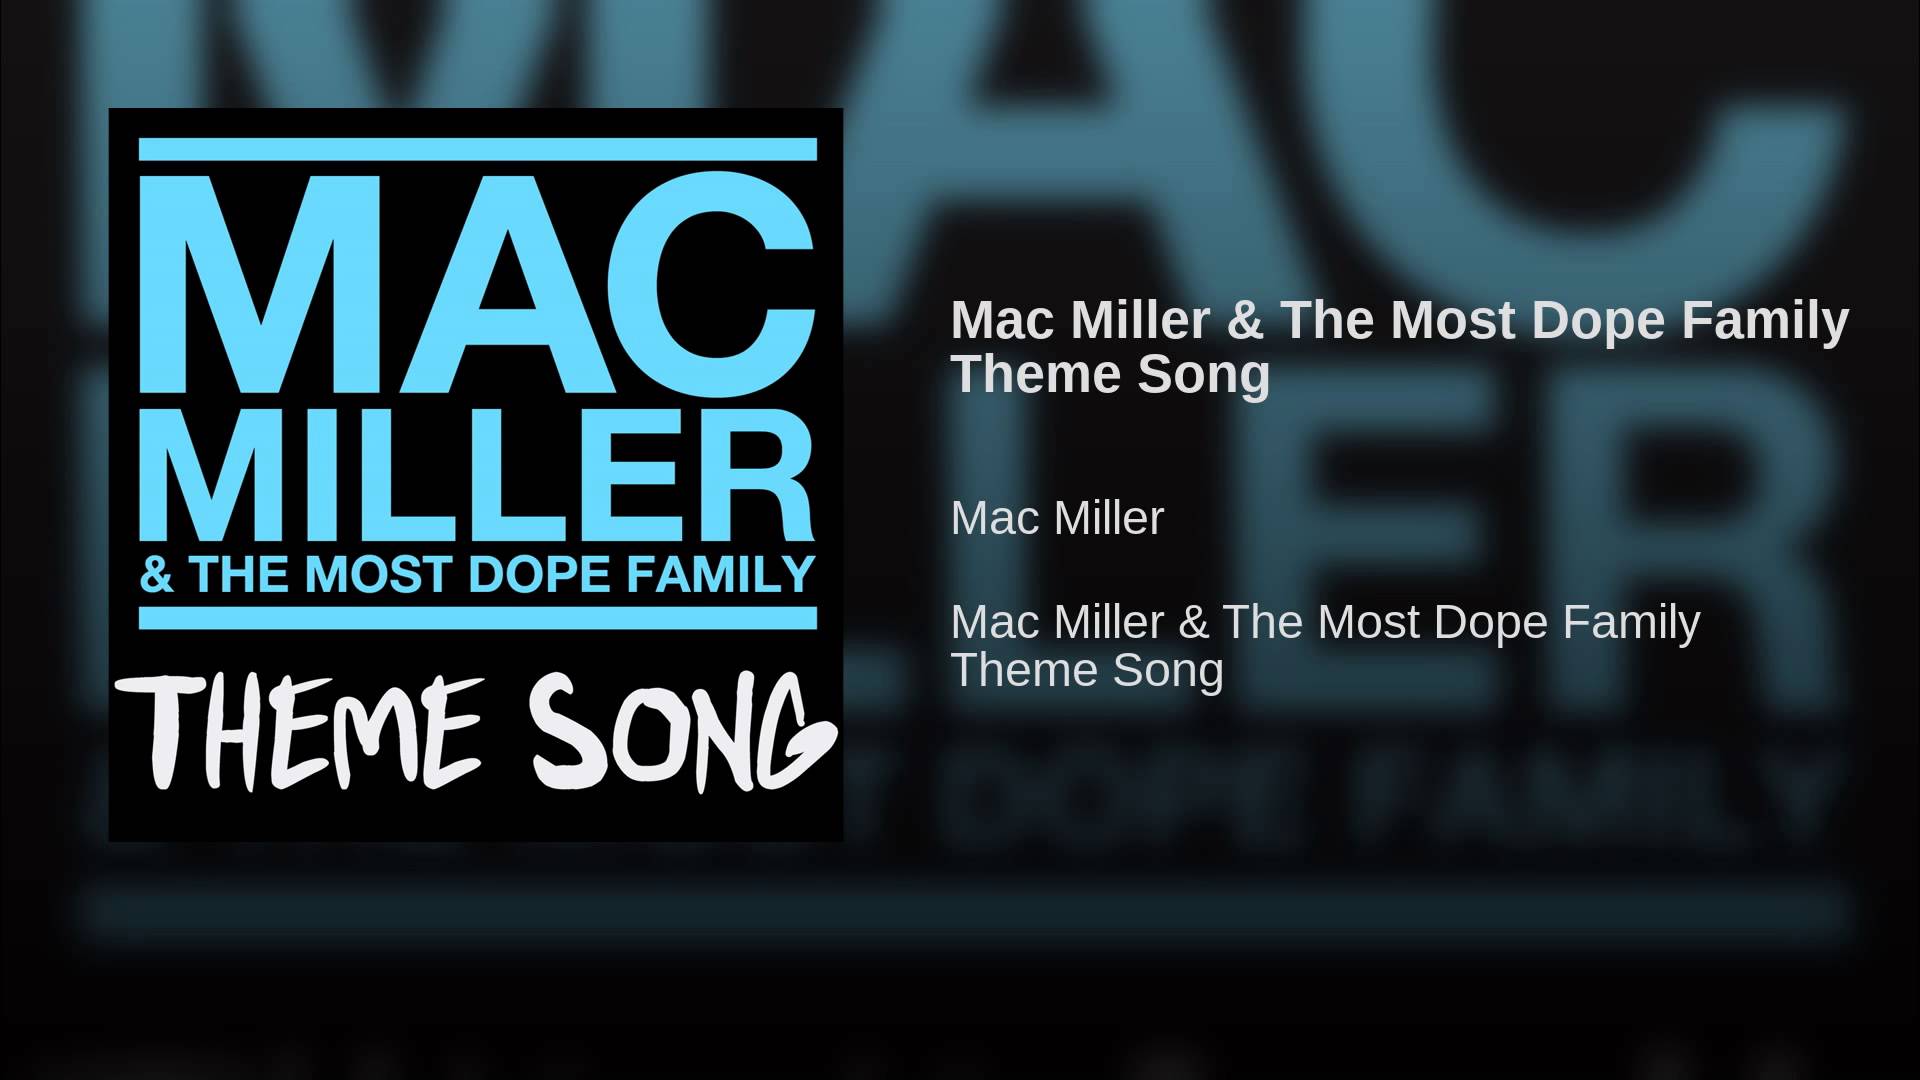 Mac Miller & The Most Dope Family Theme Song